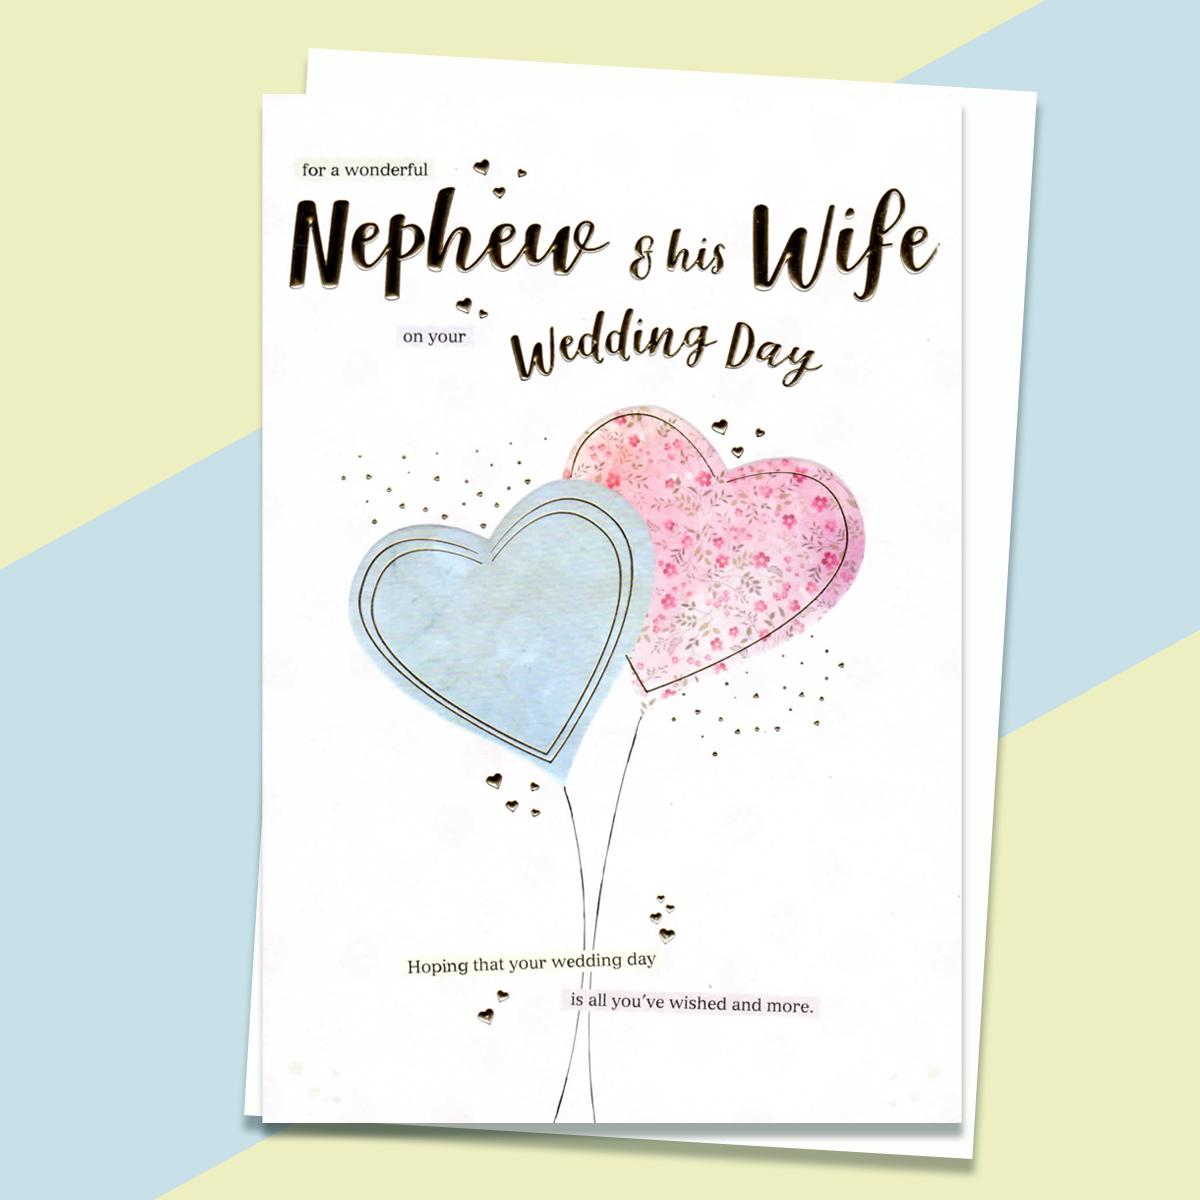 A Selection Of Cards To Show The Depth Of Range In Our Nephew Wedding Cards Section